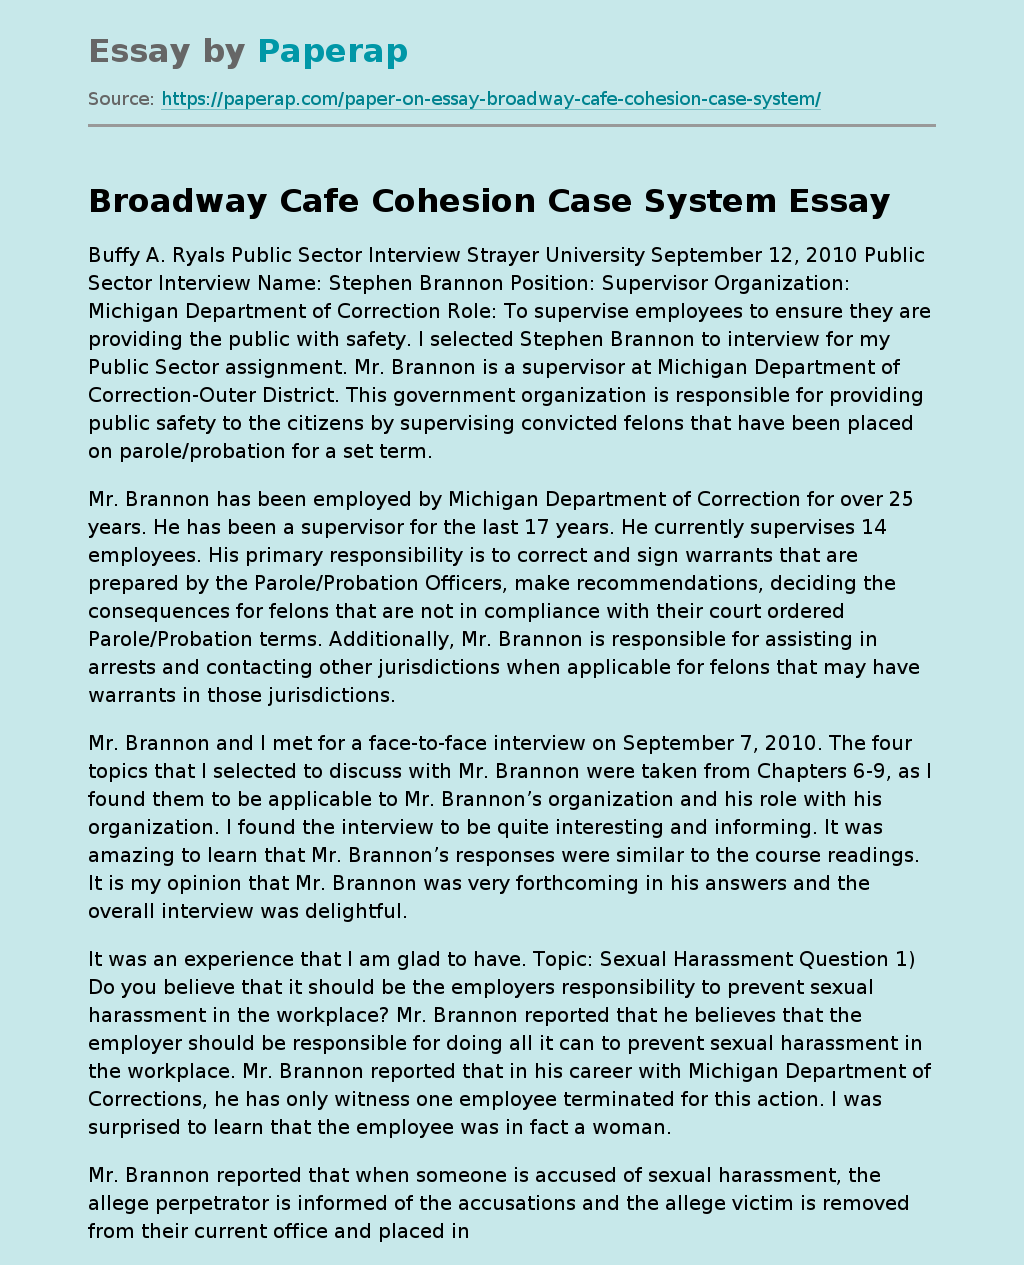 Broadway Cafe Cohesion Case System